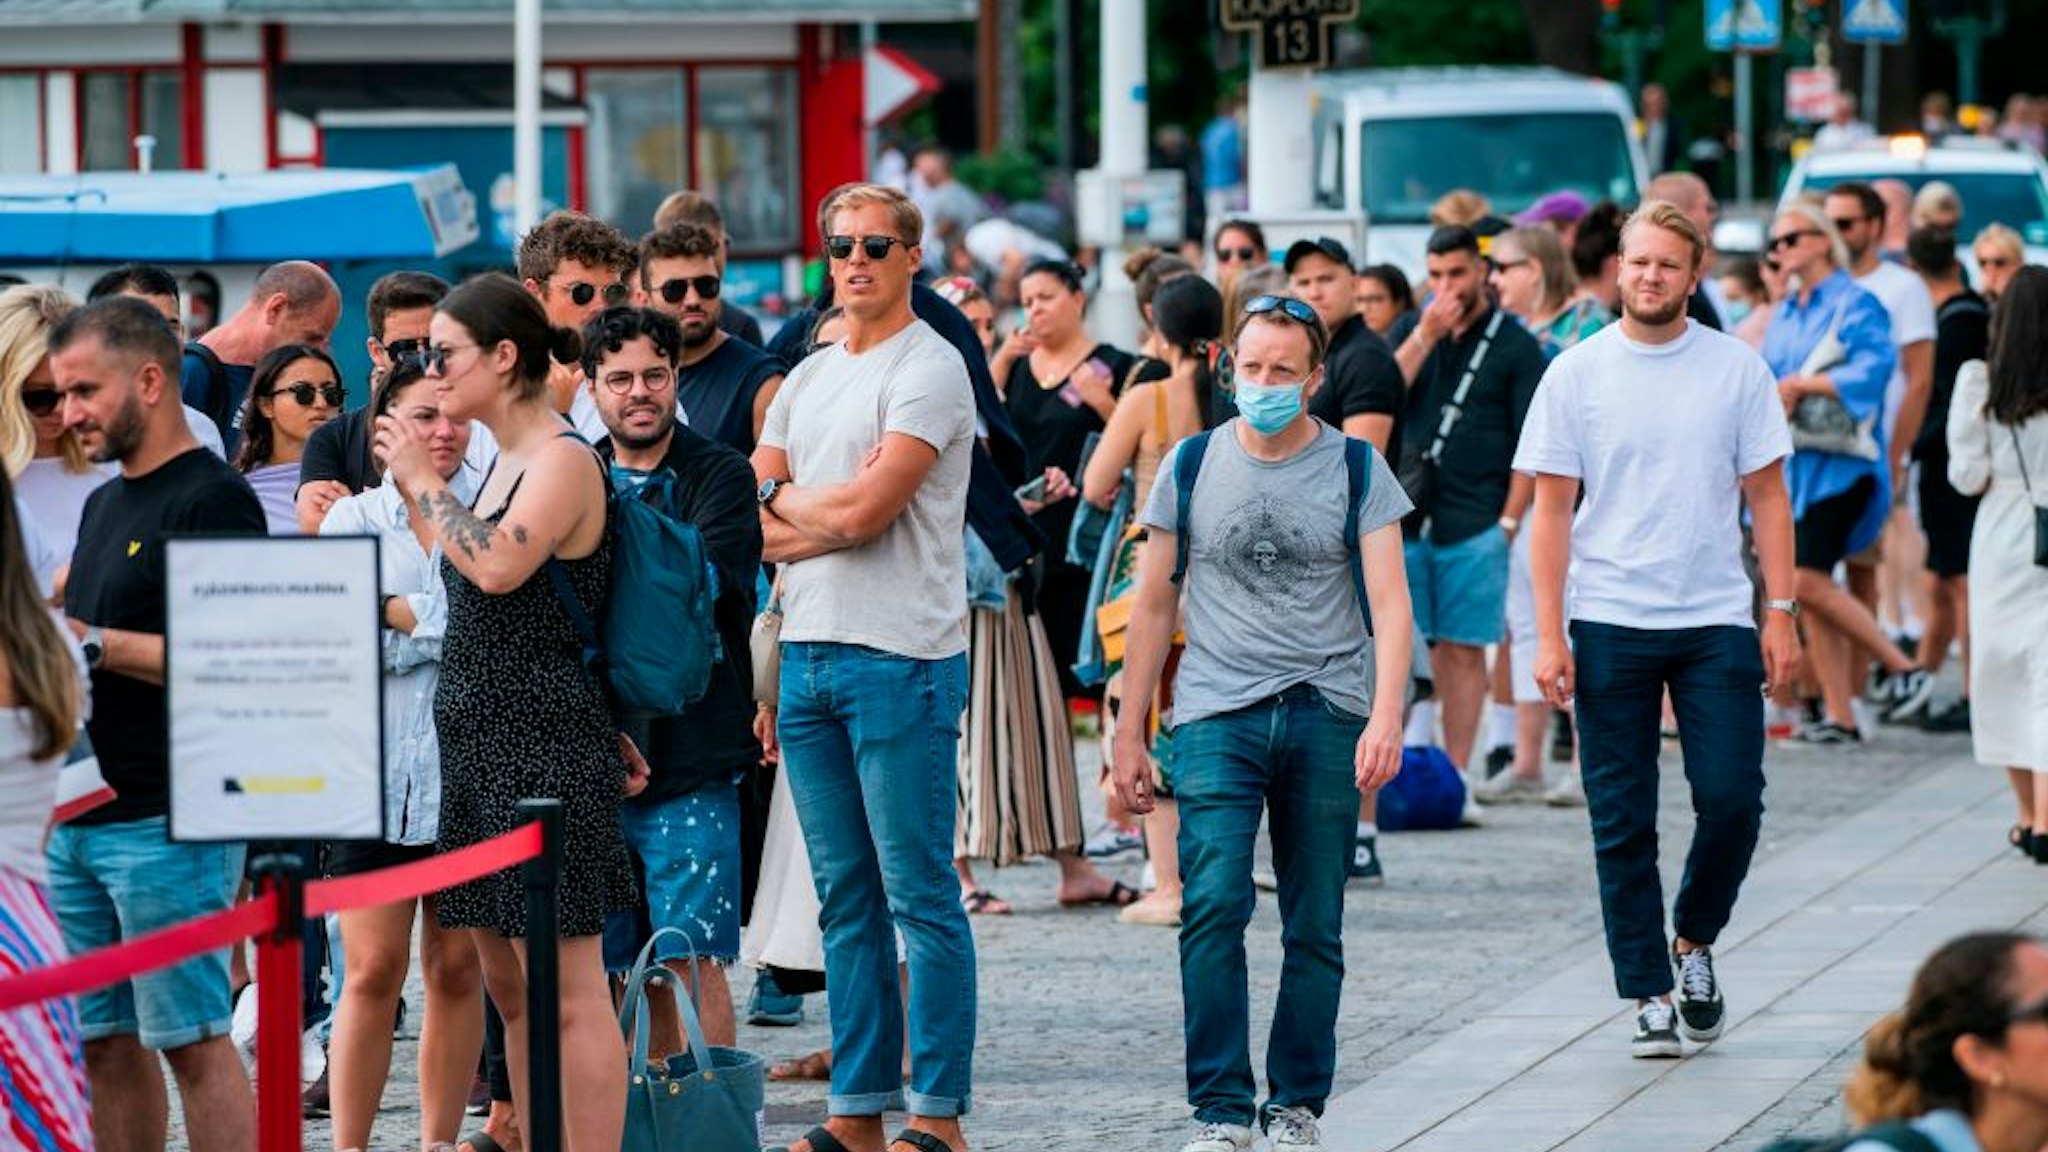 A man wearing a protective mask walks next to travellers as they queue up to board a boat at Stranvagen in Stockholm on July 27, 2020, during the novel coronavirus